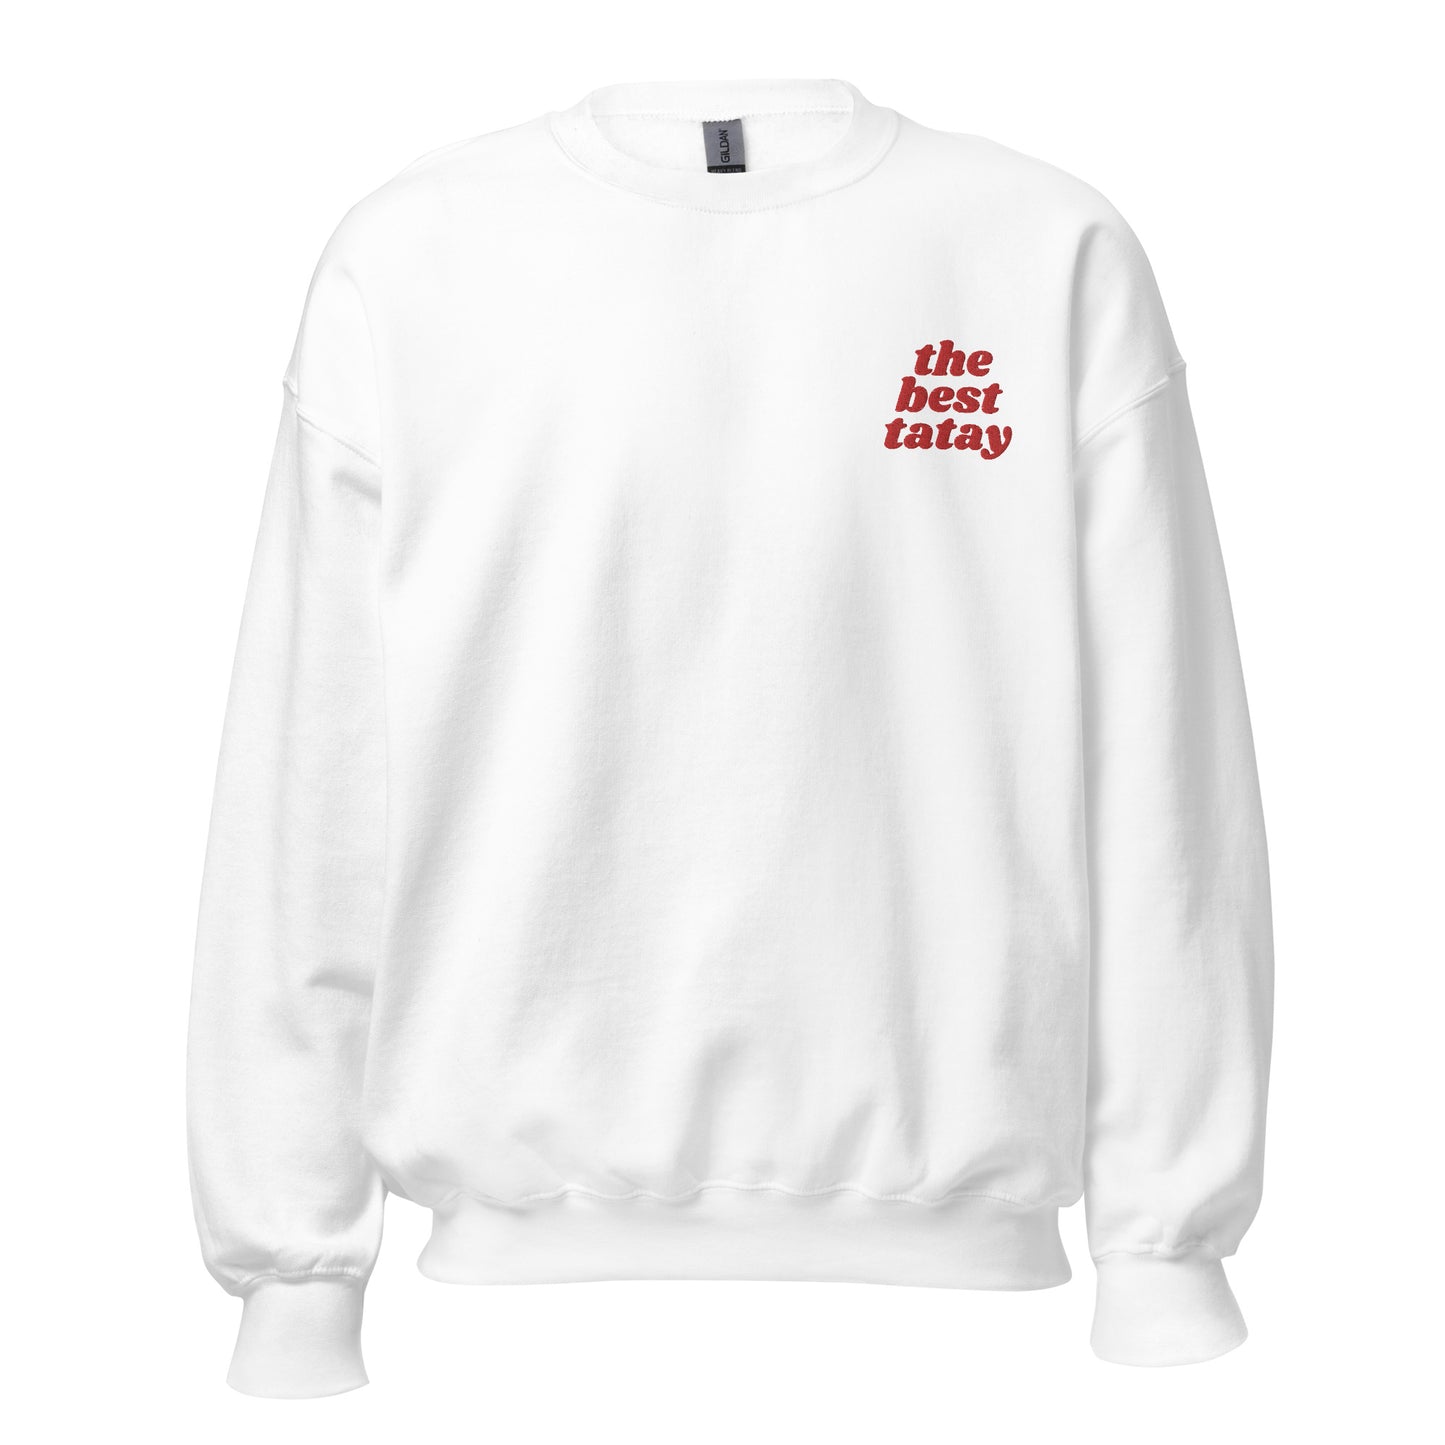 Filipino Sweatshirt Crew Neck The Best Tatay Super Dad Embroidered Father's Day Gift in color variant White